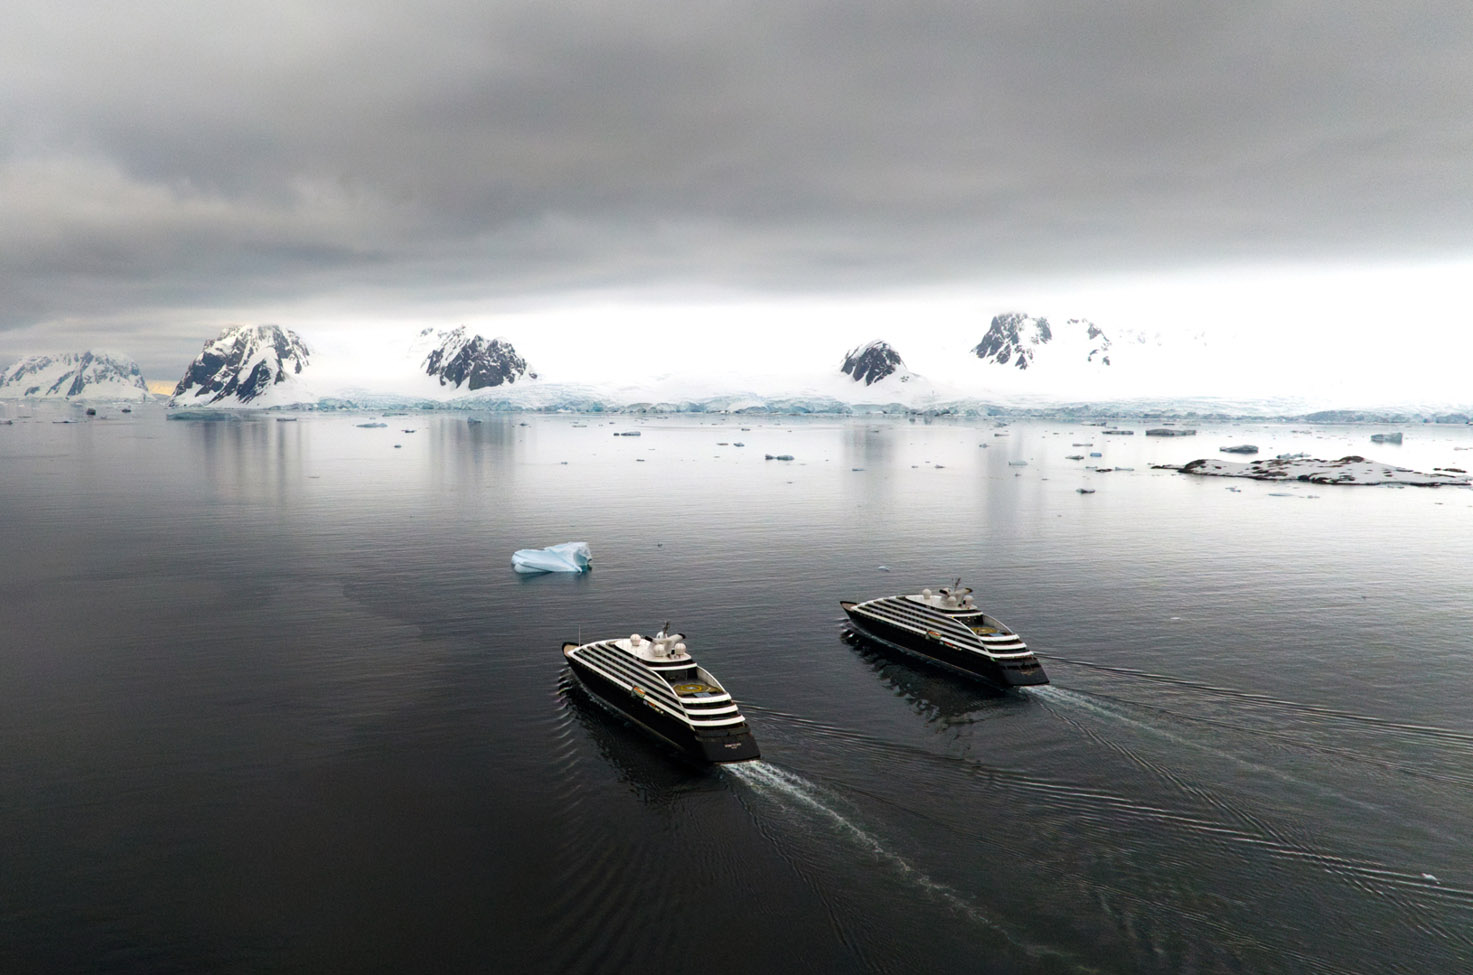 Scenic Eclipse I and II sail away together in Antarctica with black and white icebergs in the background and a grey cloudy sky